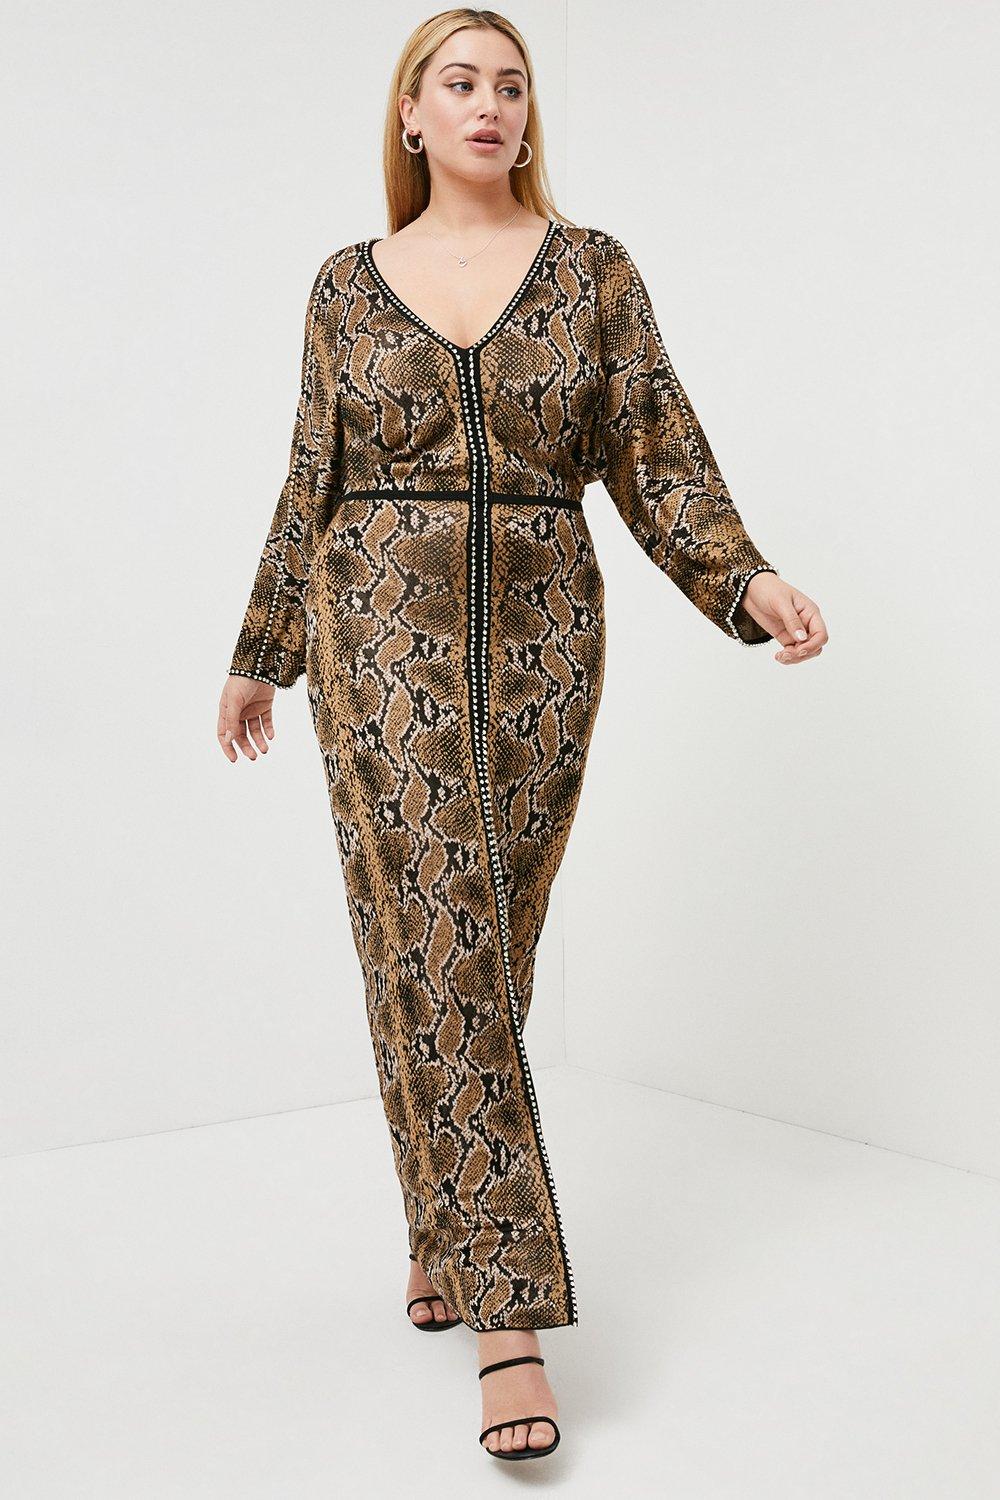 Plus size Slinky Snake Knitted Maxi ...